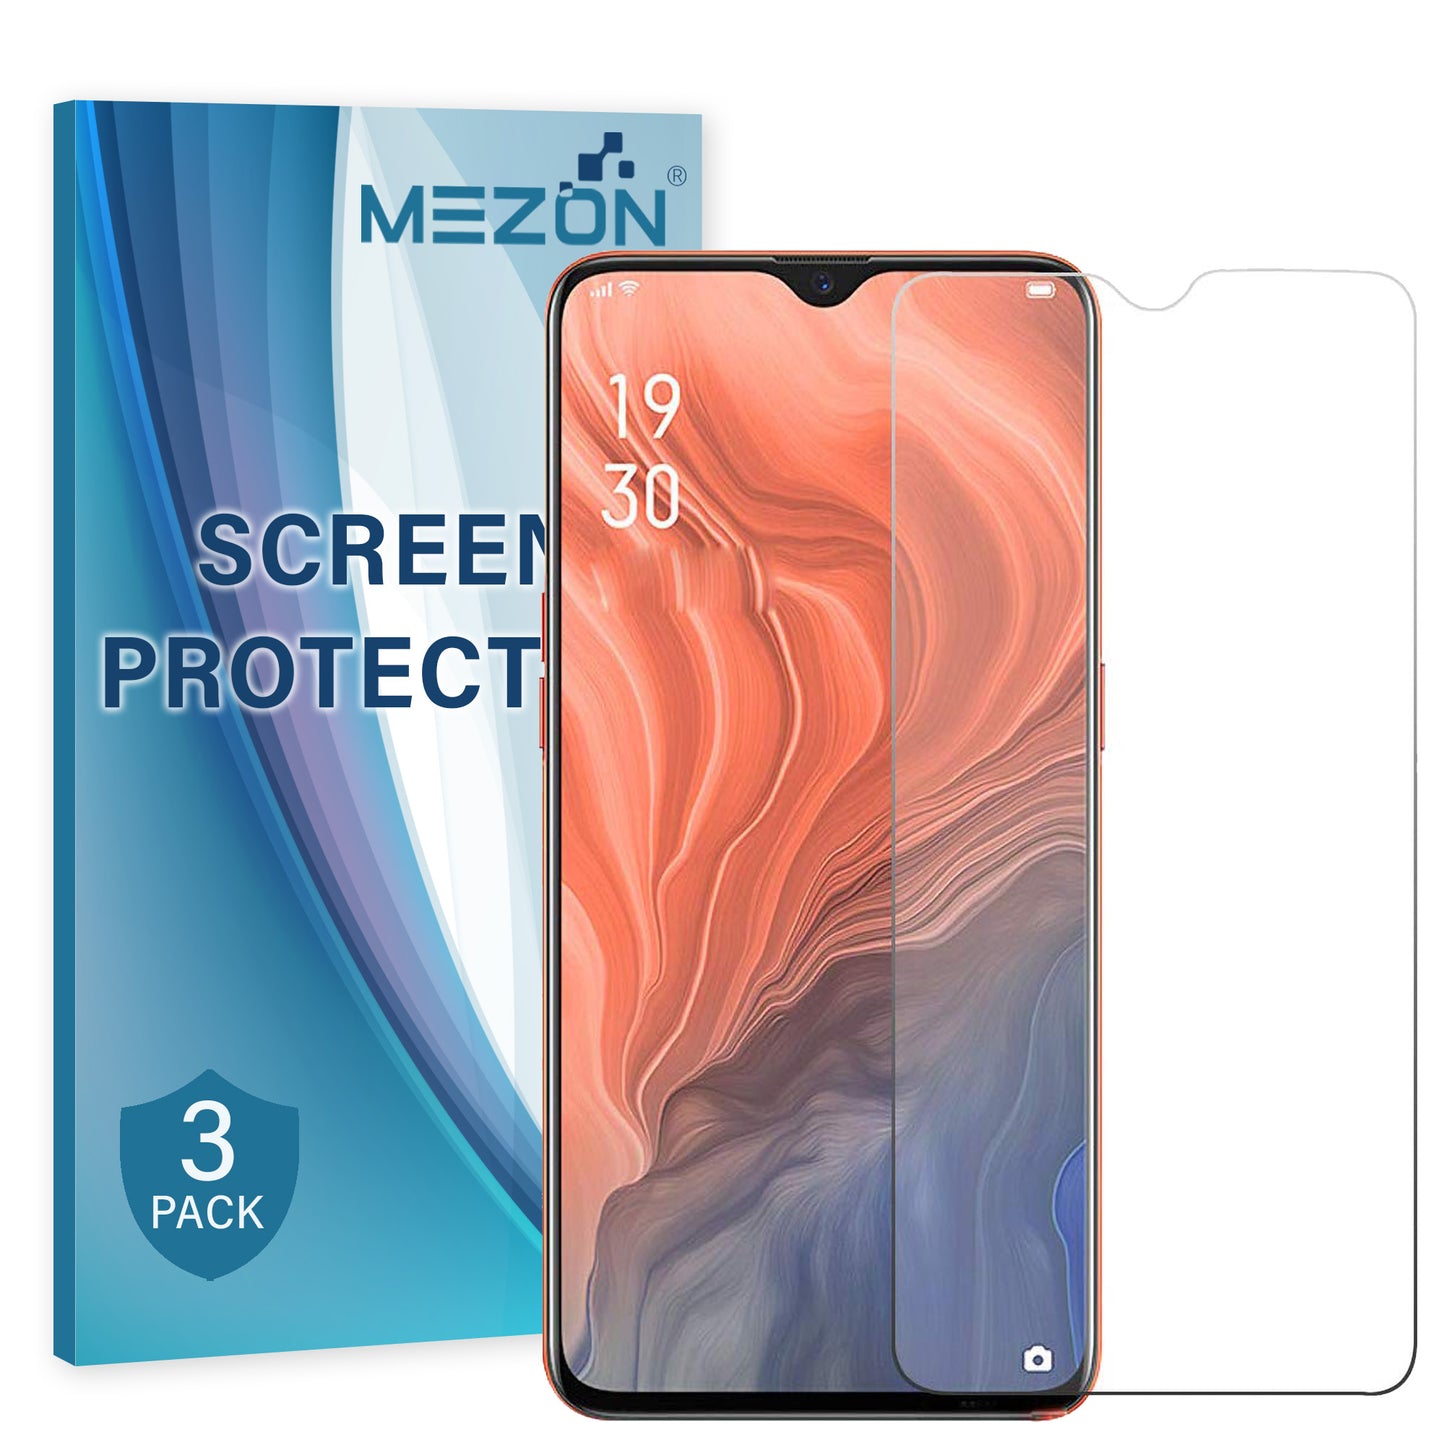 [3 Pack] MEZON Realme 5 Ultra Clear Screen Protector Case Friendly Film (Realme 5, Clear)